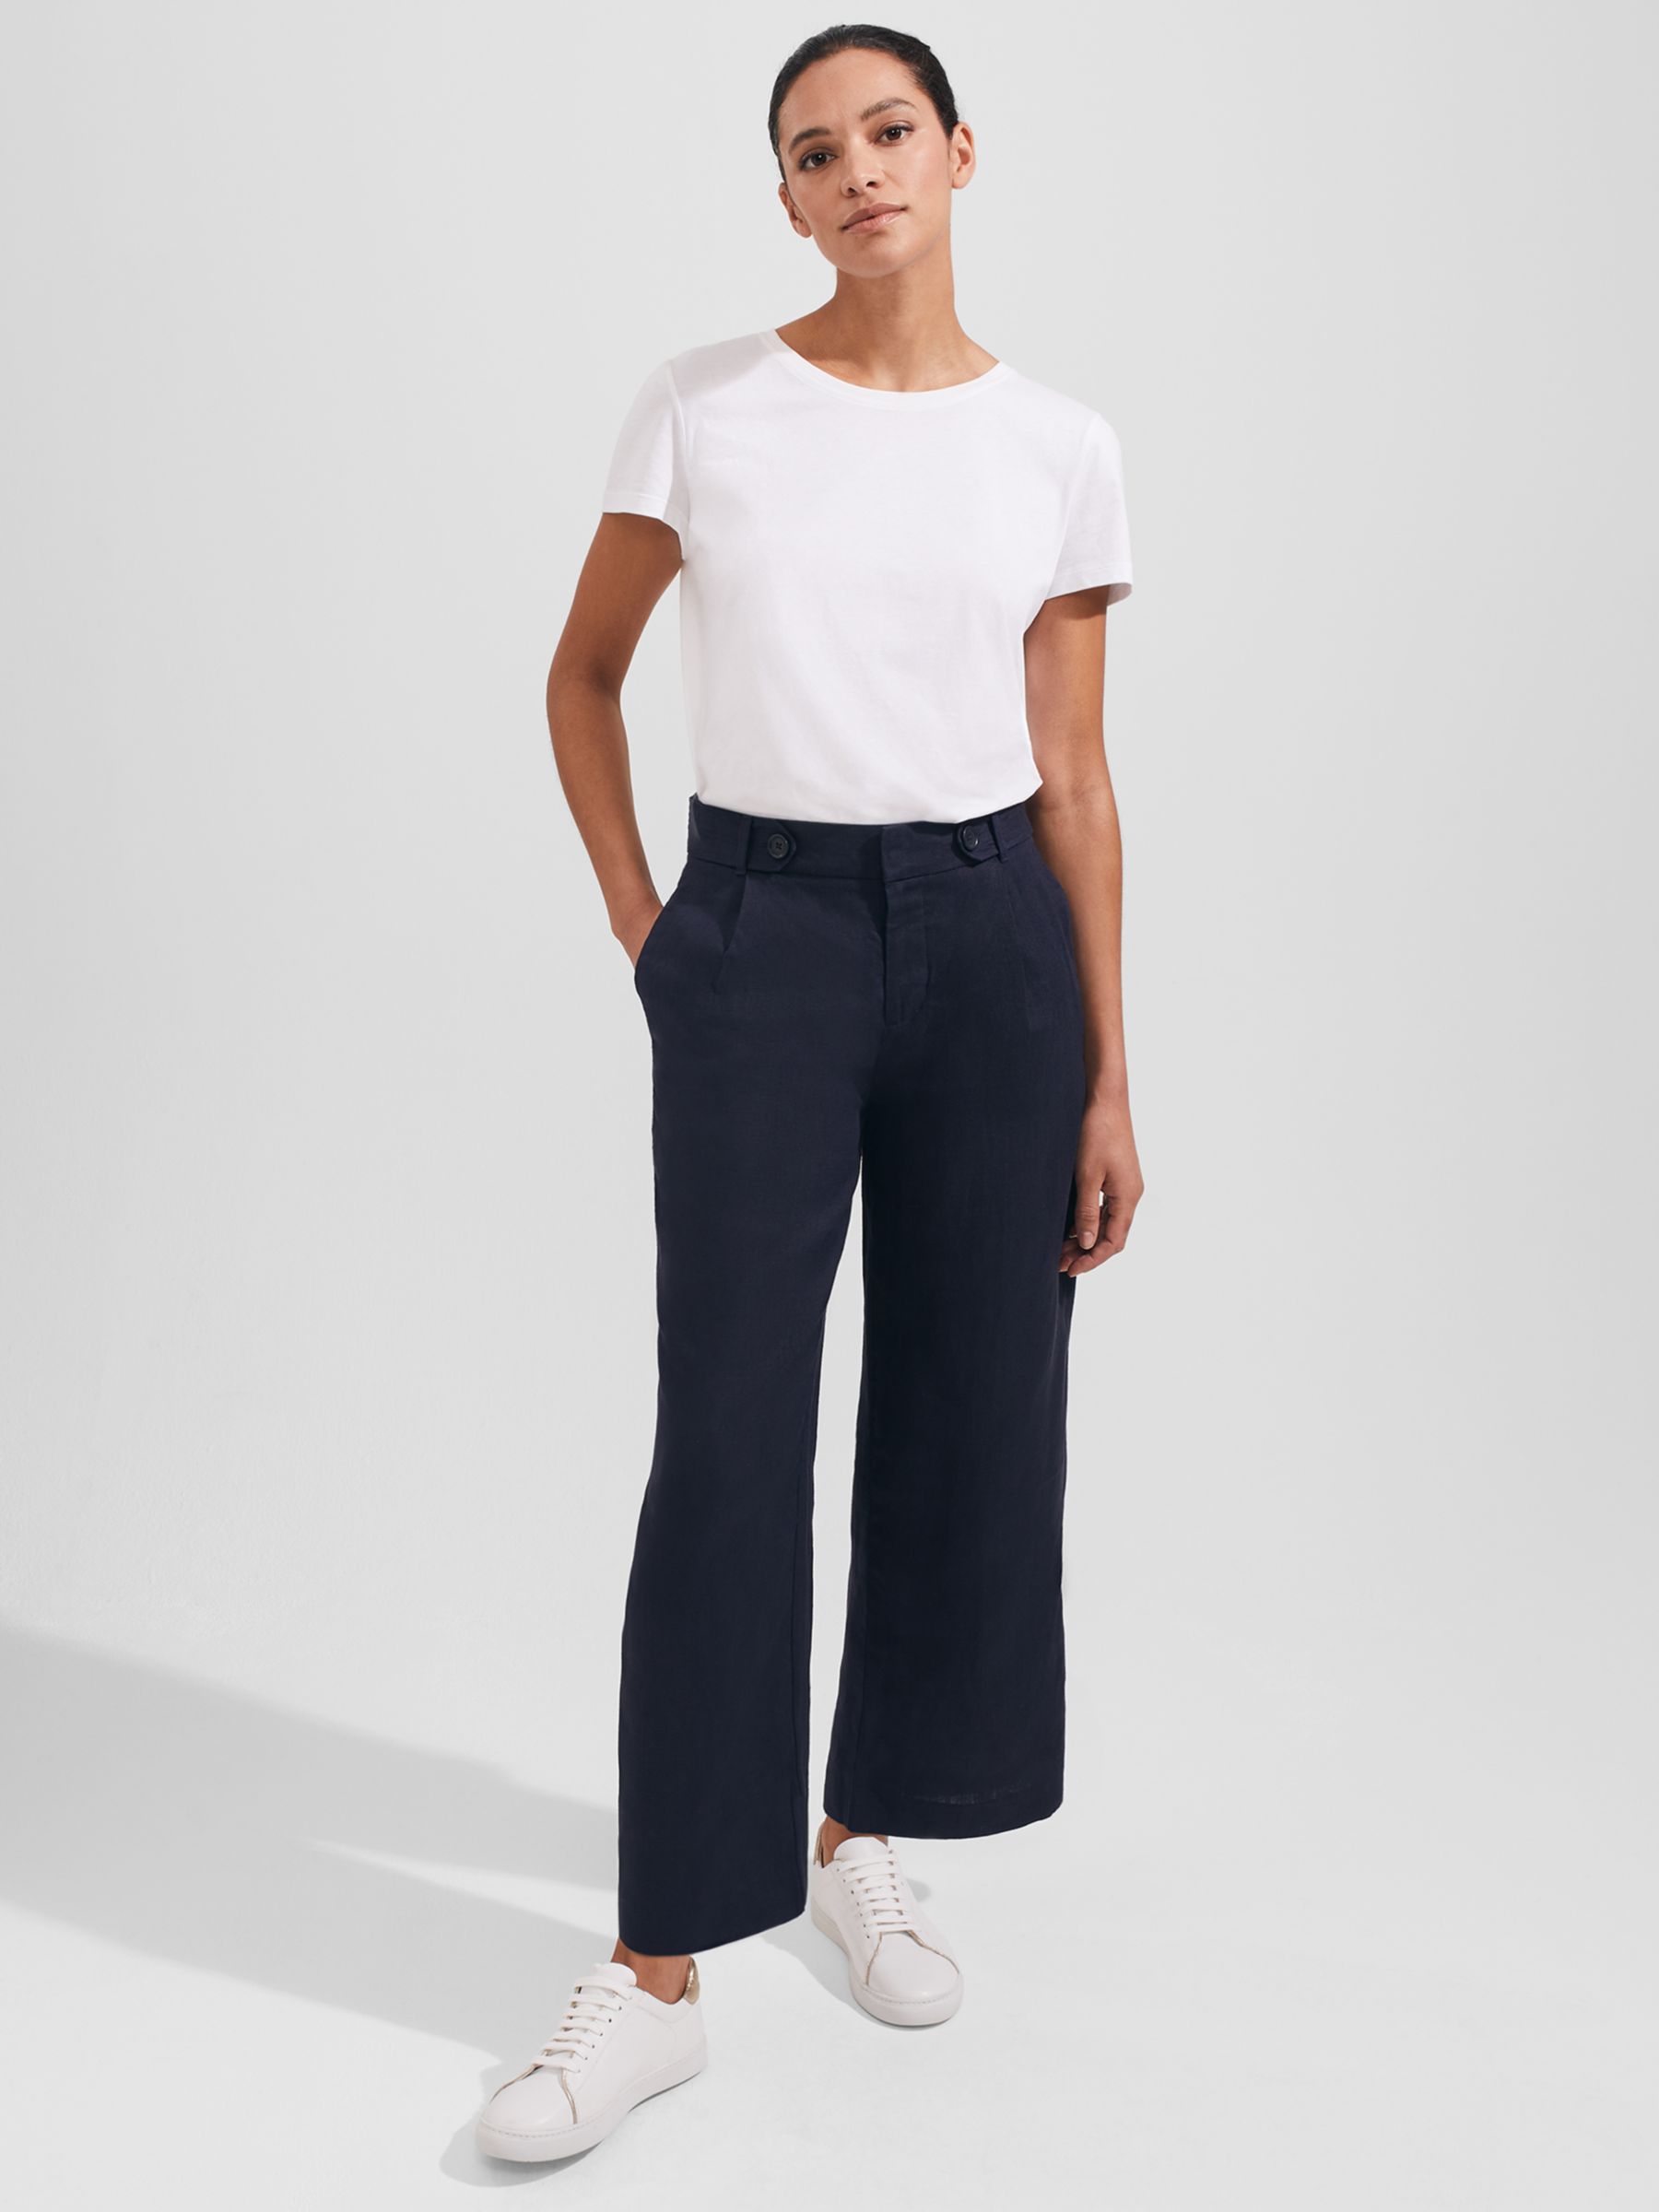 Hobbs Keighley Cropped Linen Trousers, Navy, 6